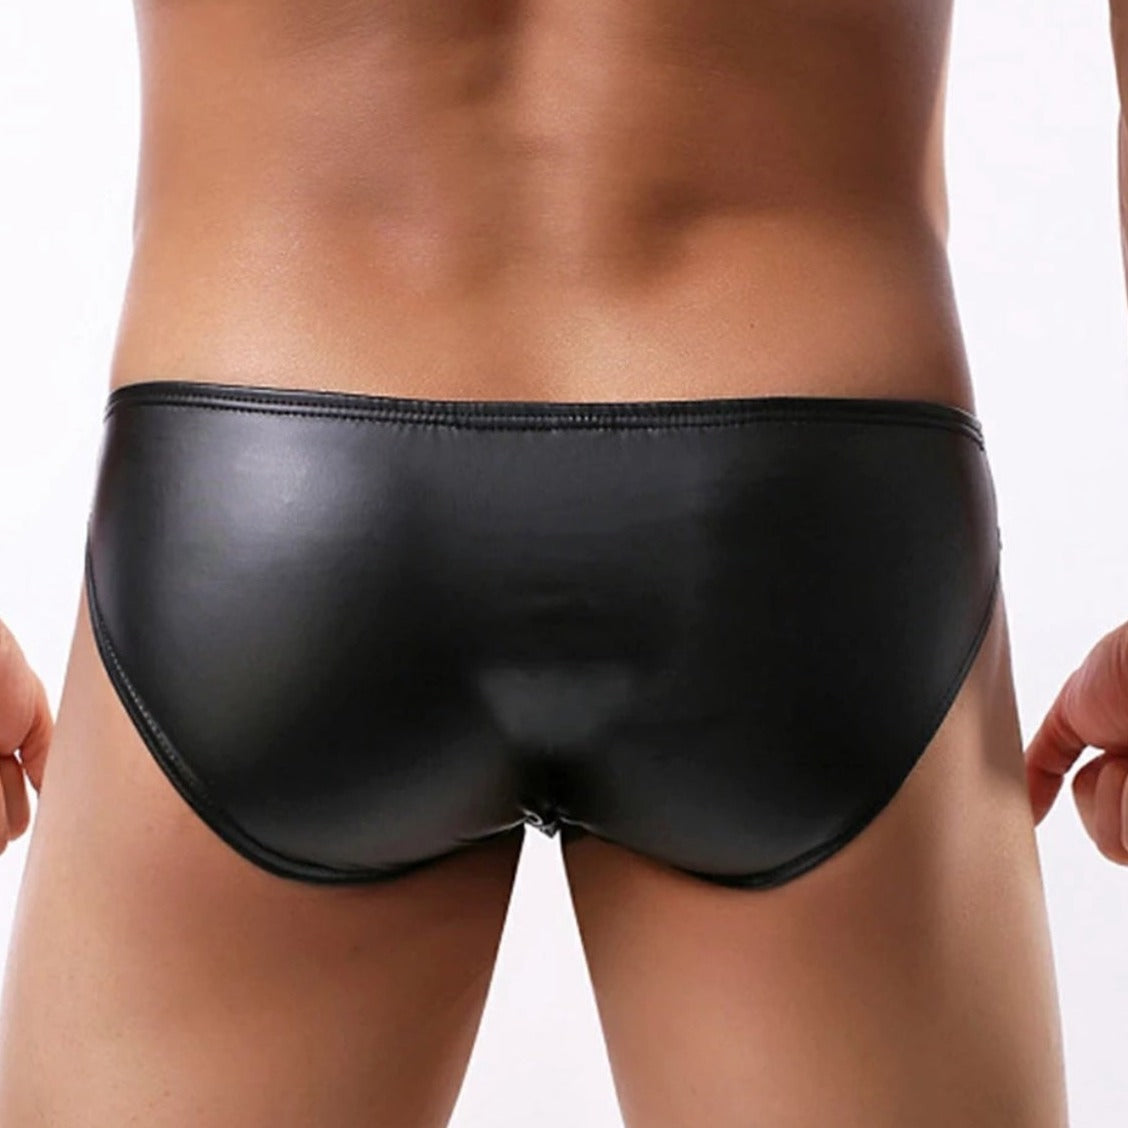 Black shiny and sexy rubber briefs, shorts or swimming trunks